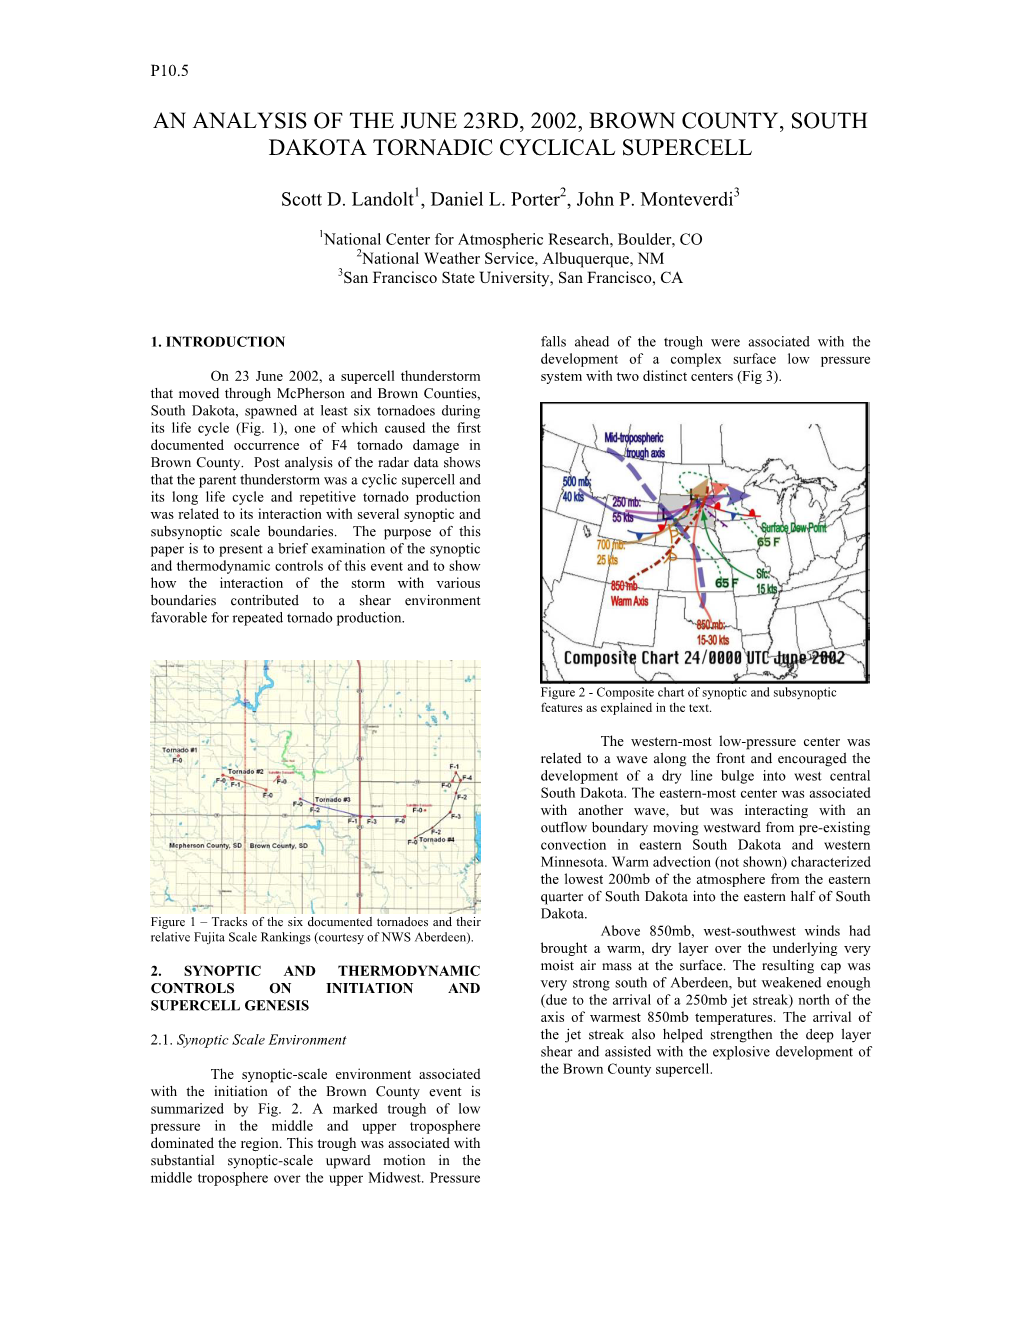 An Analysis of the June 23Rd, 2002, Brown County, South Dakota Tornadic Cyclical Supercell